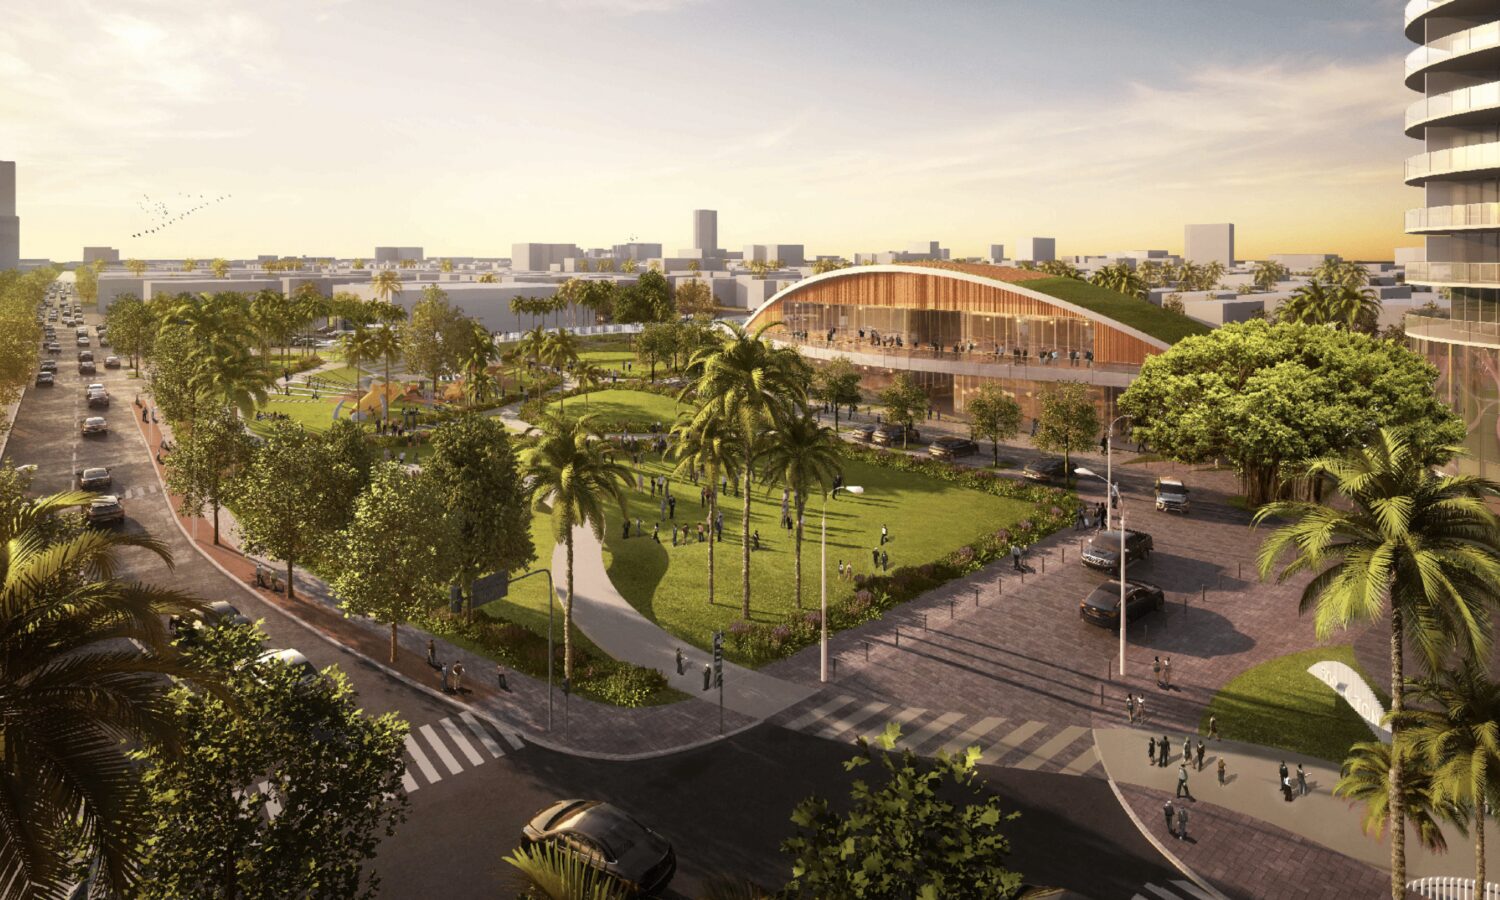 New Pictures Reveal What Alton Road Park Will Look Like